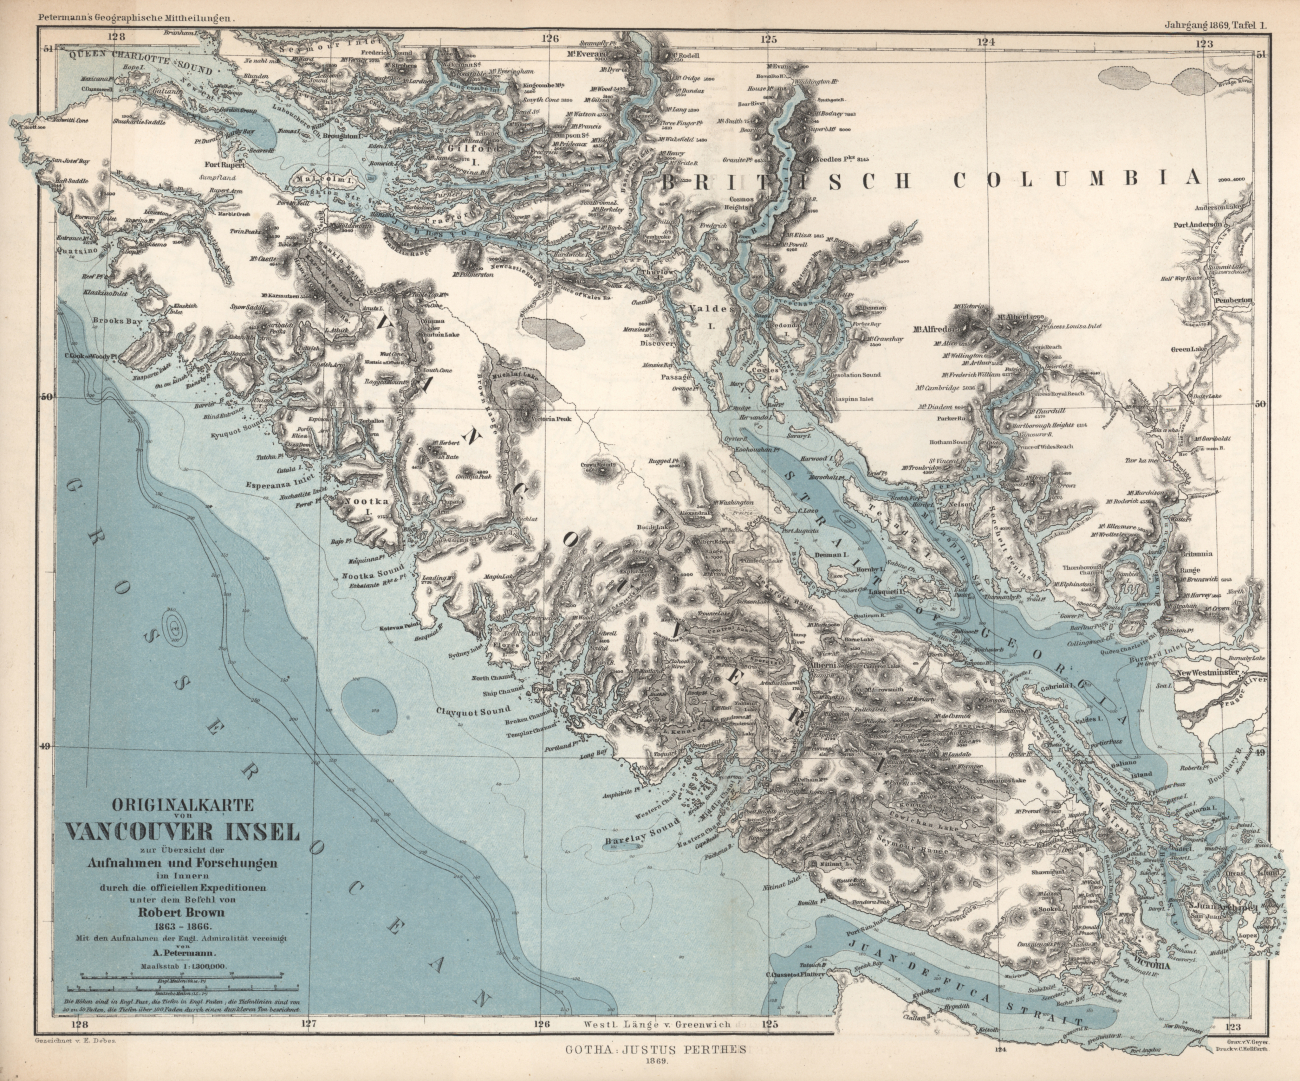 Map of Vancouver Island showing offshore bathymetry and topography ofVancouver Island